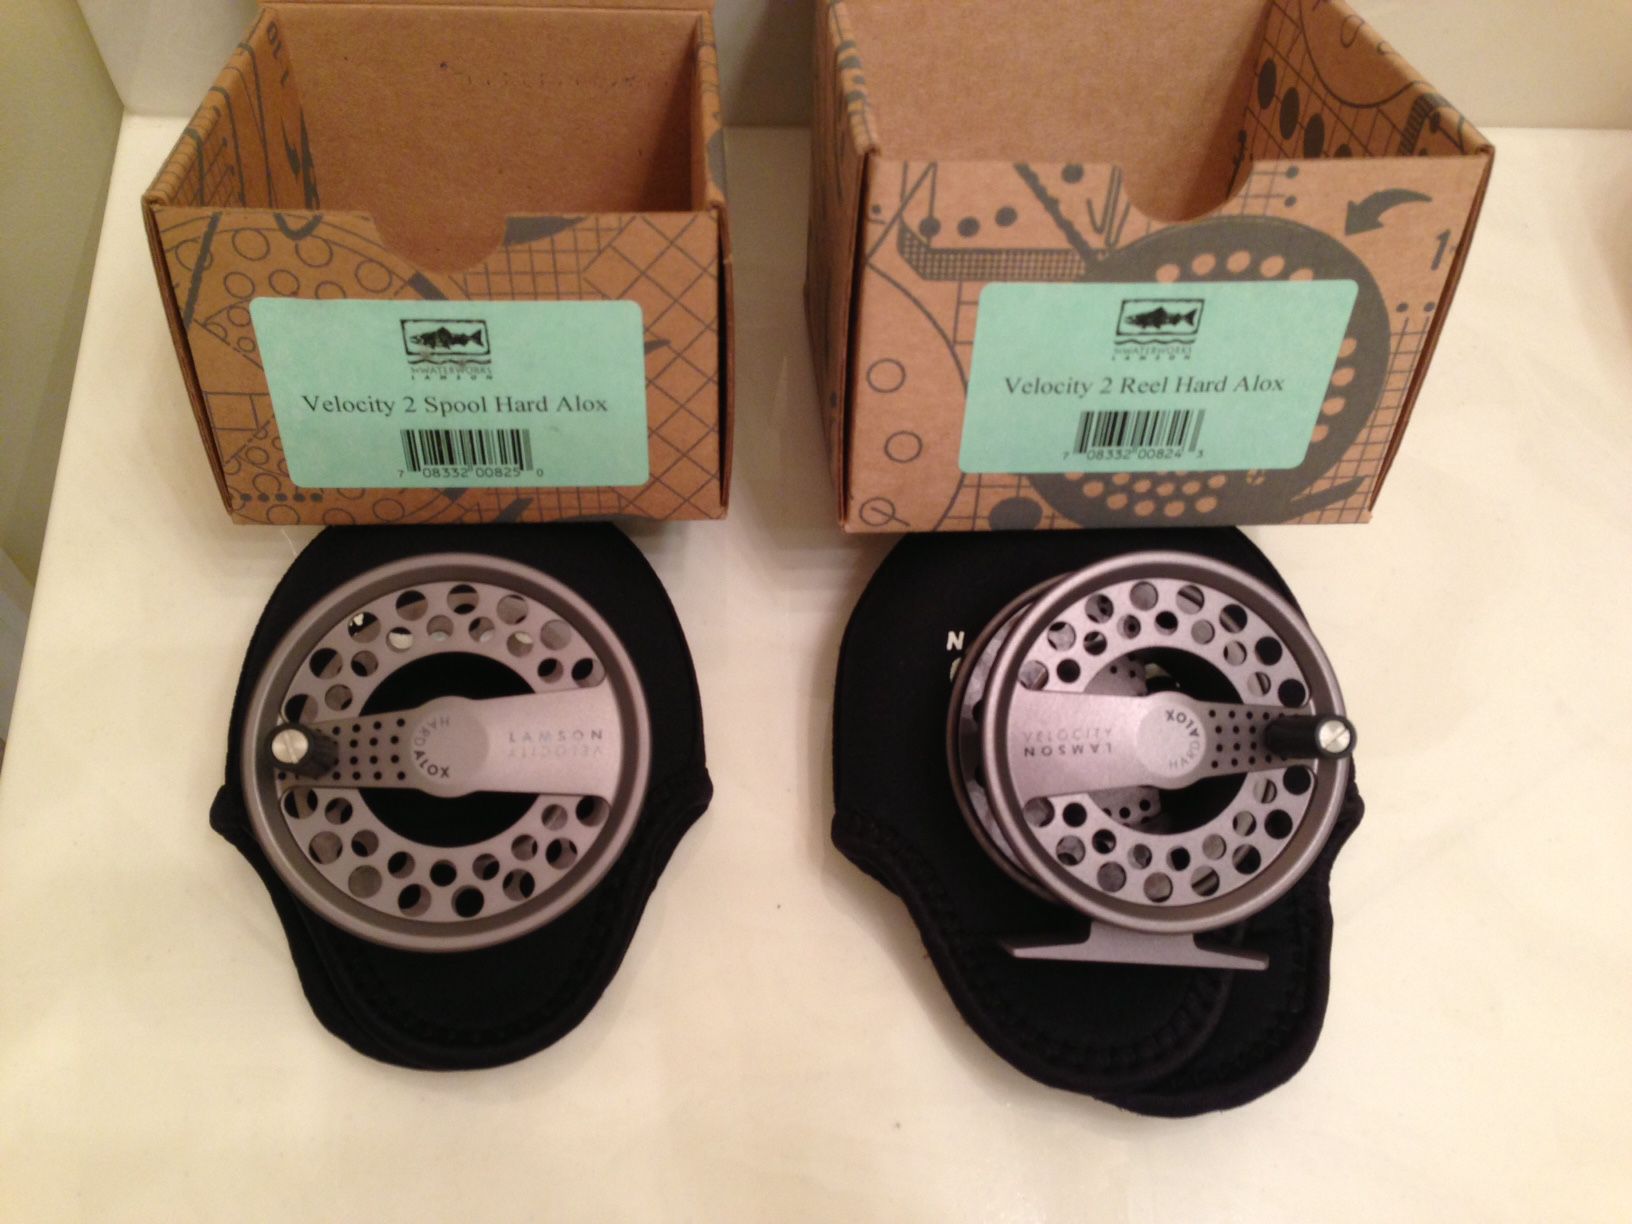 Brand New Fly Fishing Reel with Extra Spool